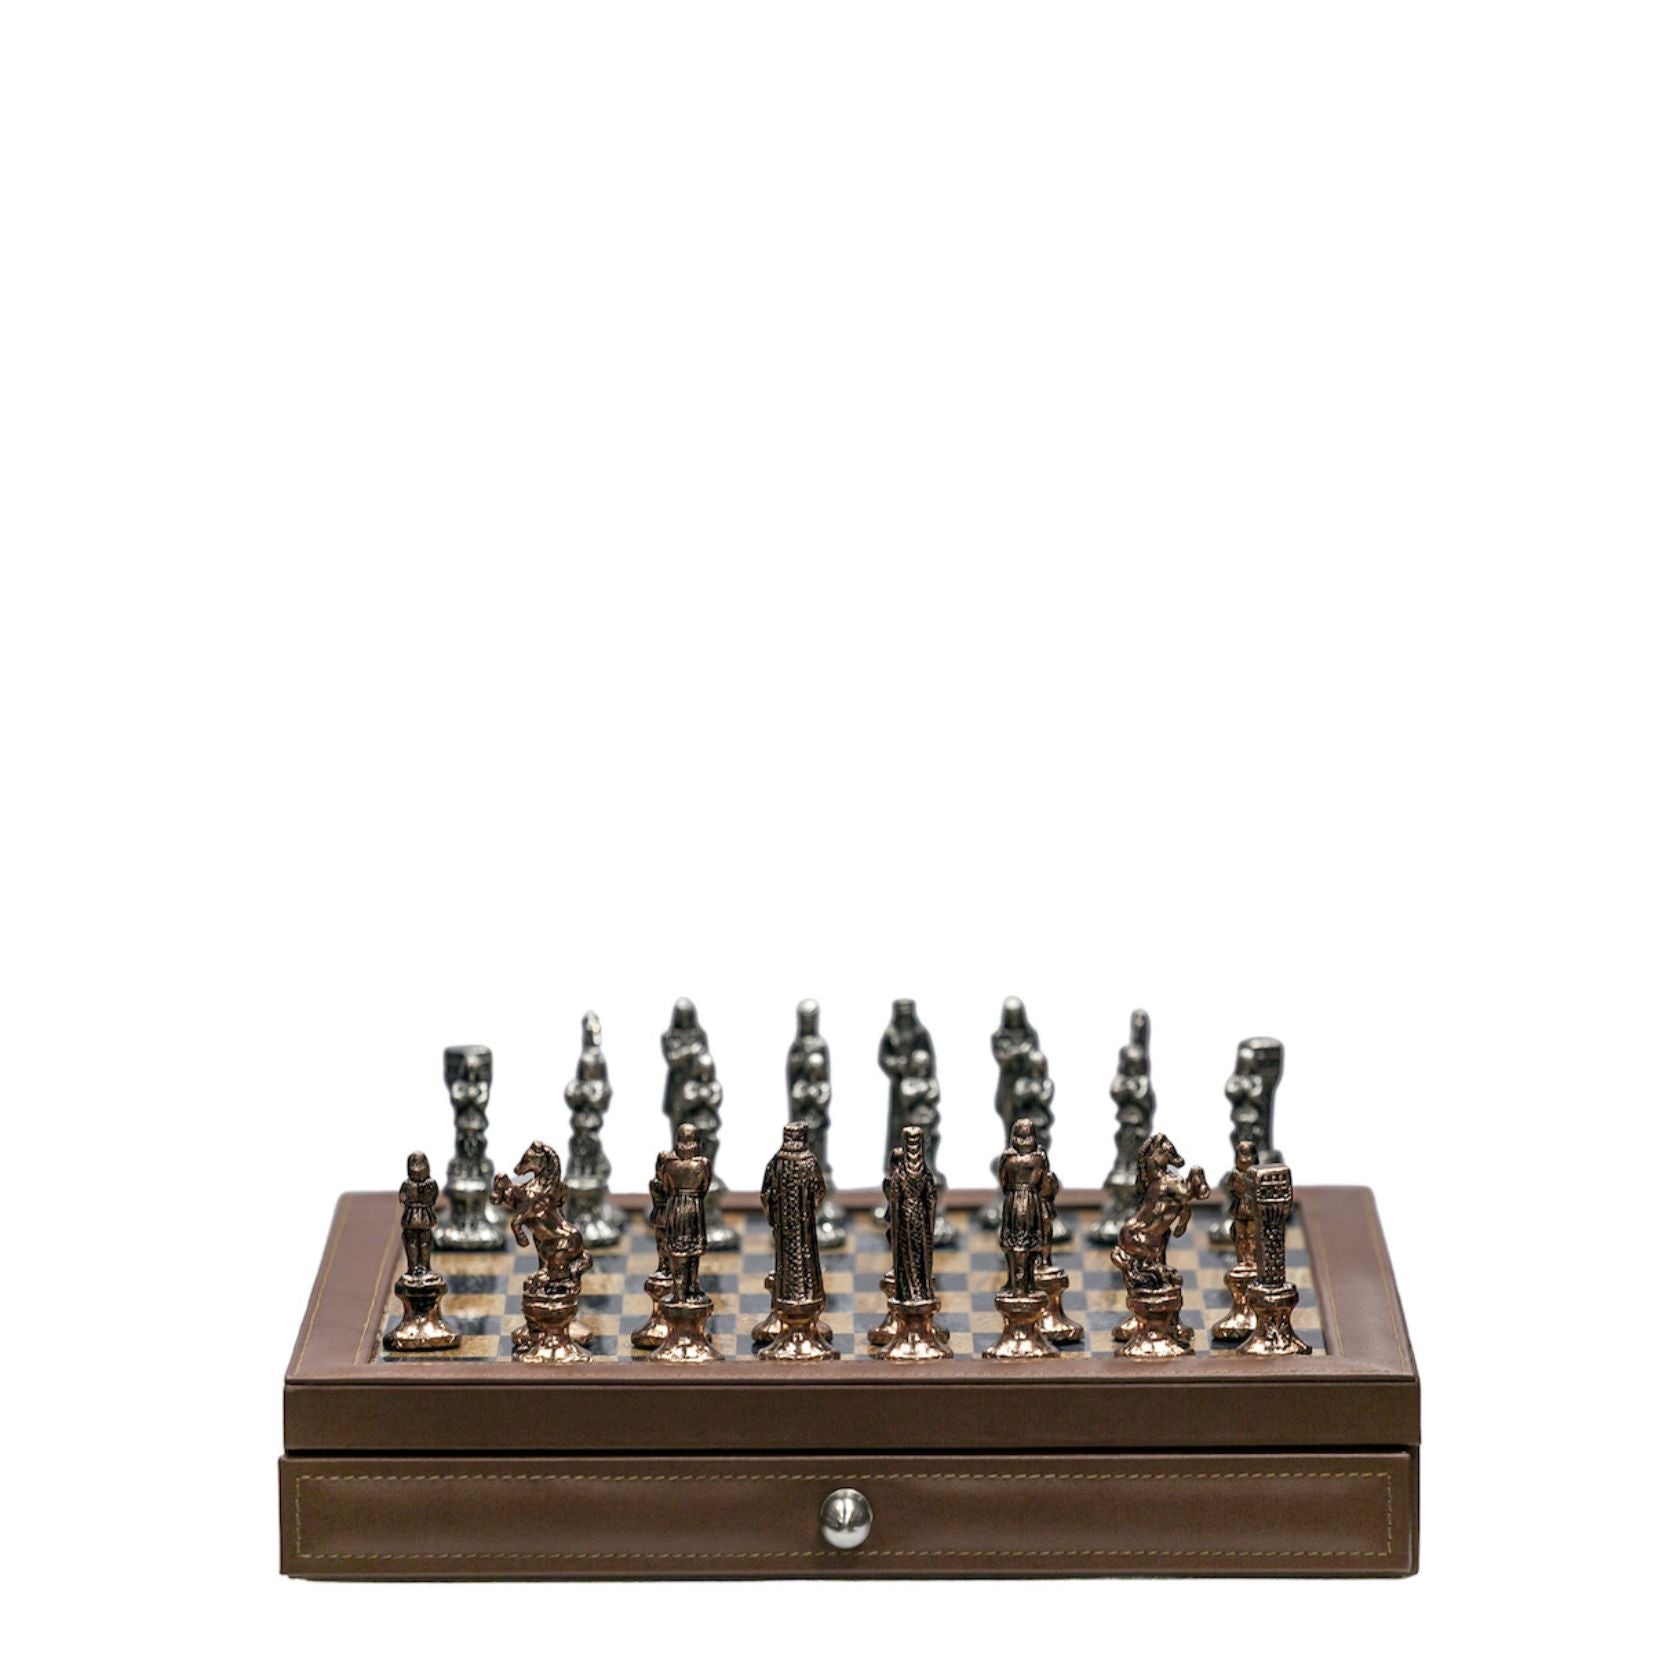 Luxury Chess Pieces Usa, Chess Pieces, Chess Sets Usa, Chess Boards